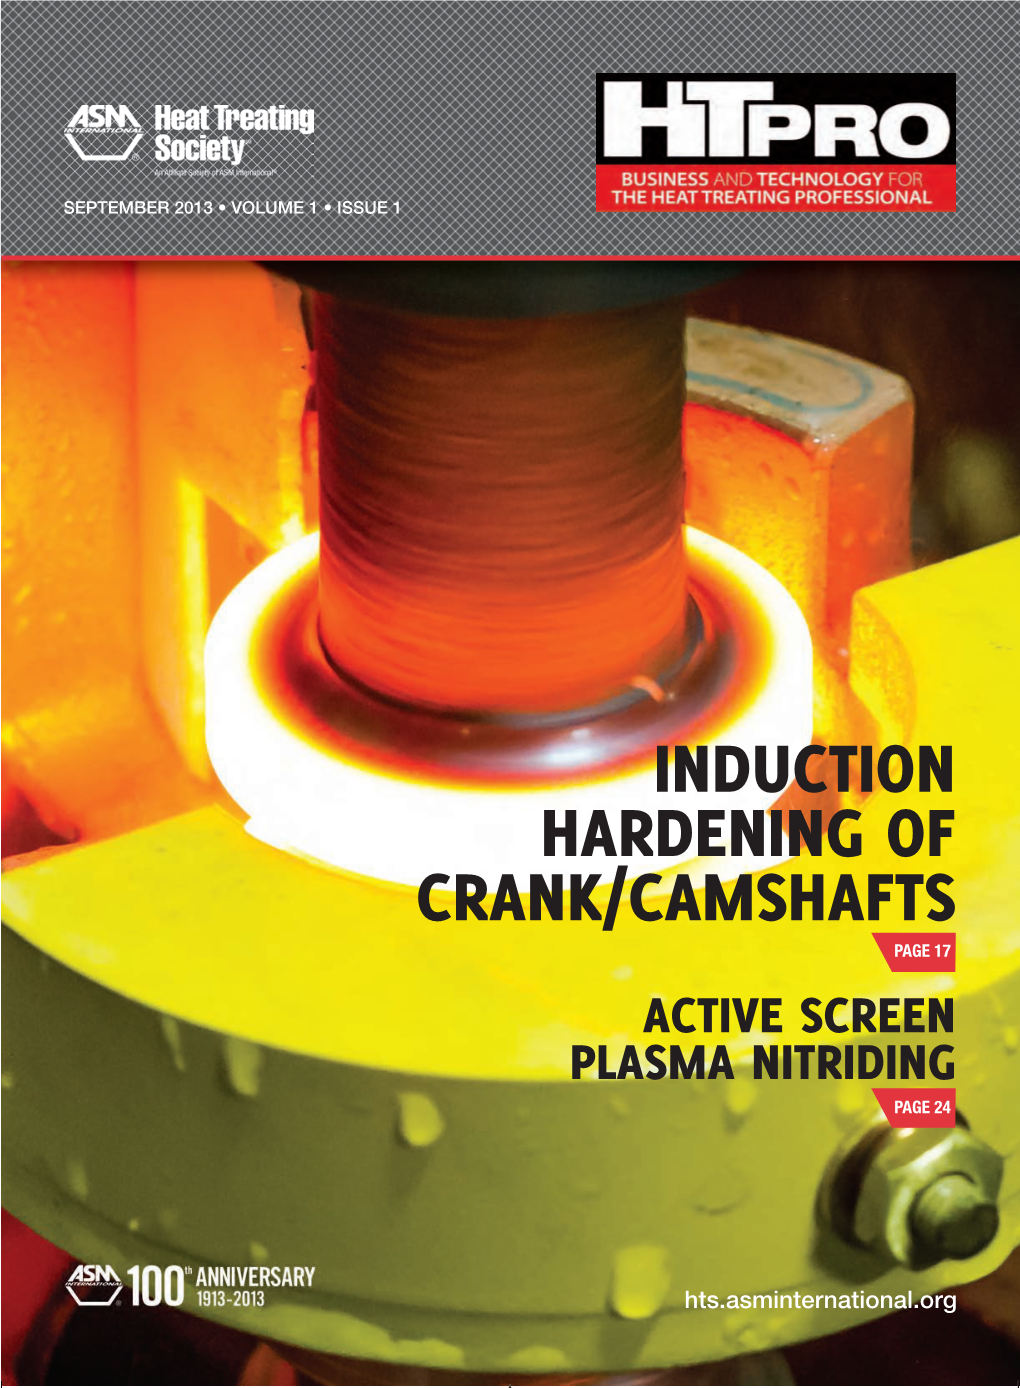 Induction Hardening of Crank/Camshafts Page 17 Active Screen Plasma Nitriding Page 24